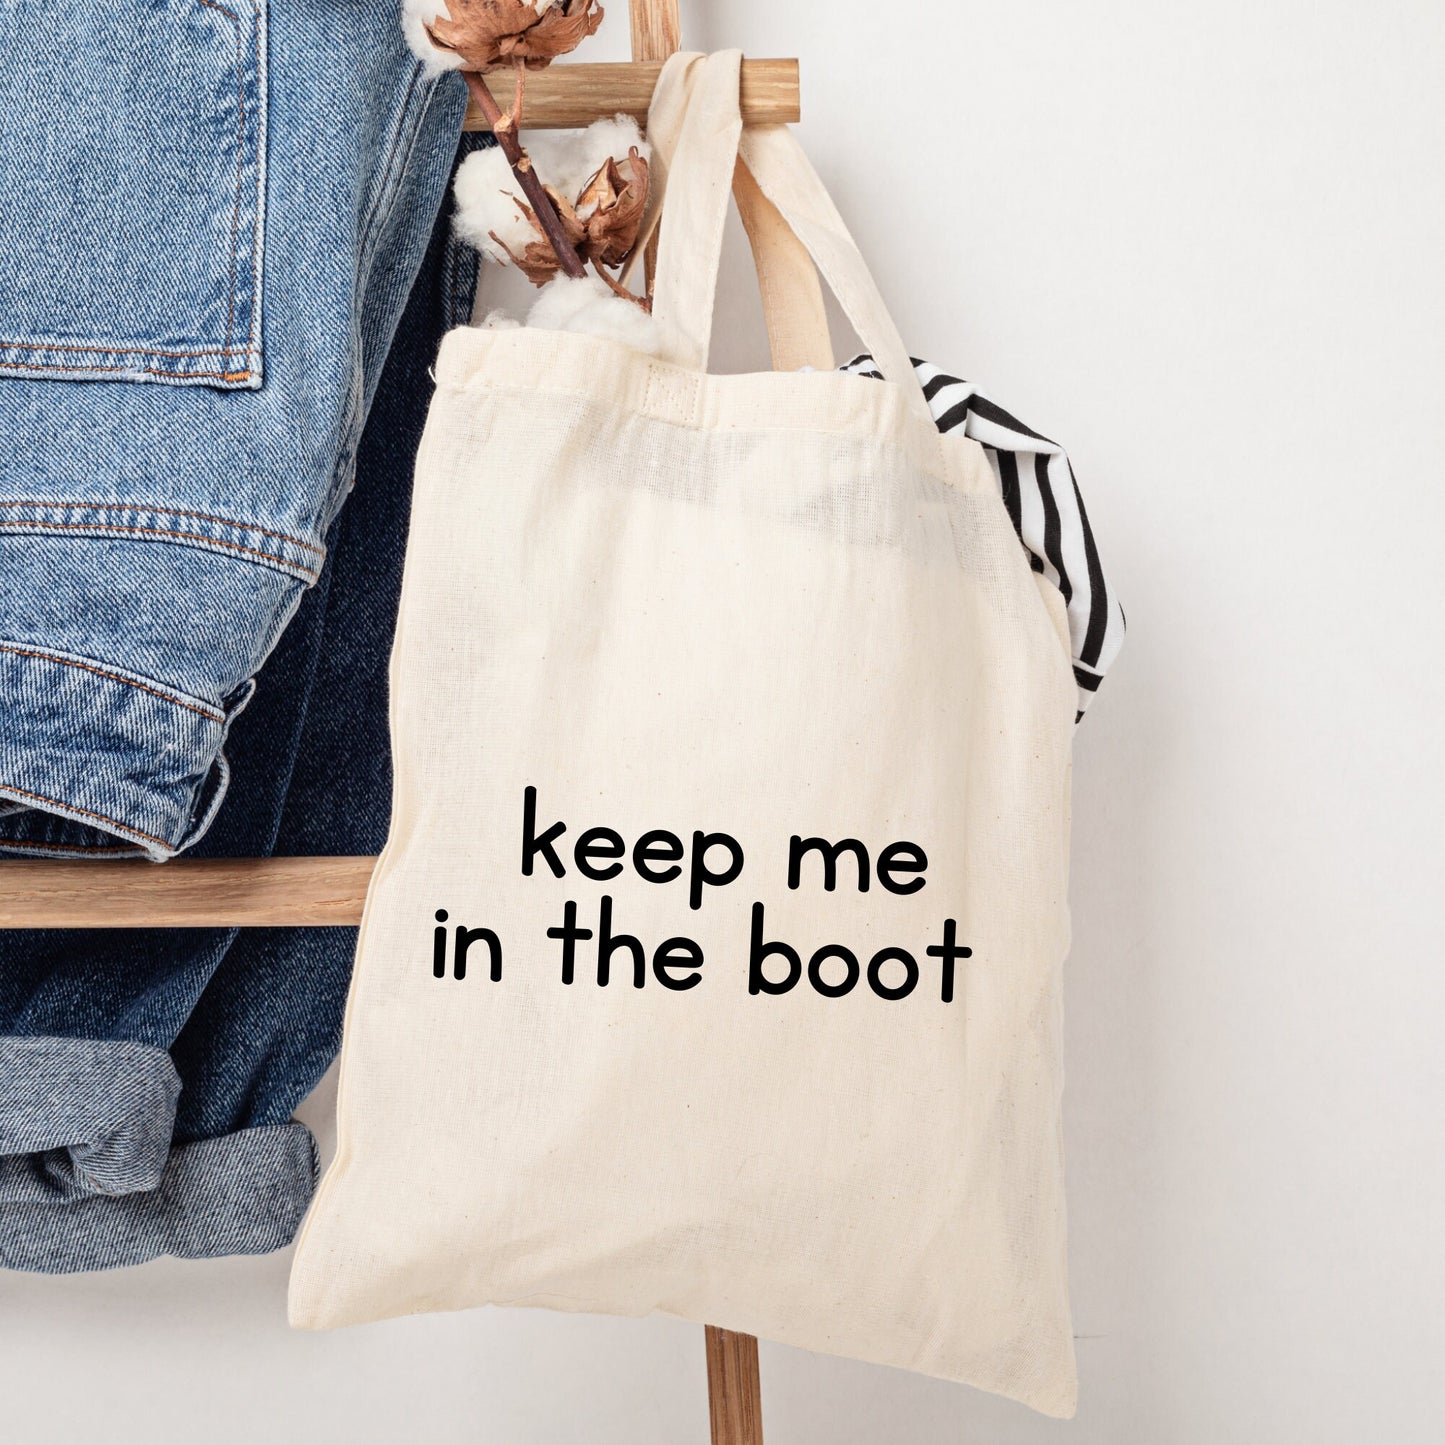 Canvas cotton shopping tote bag, keep me in the car boot bag, reusable shopper bag to carry groceries after a food shop, mum and gran gifts